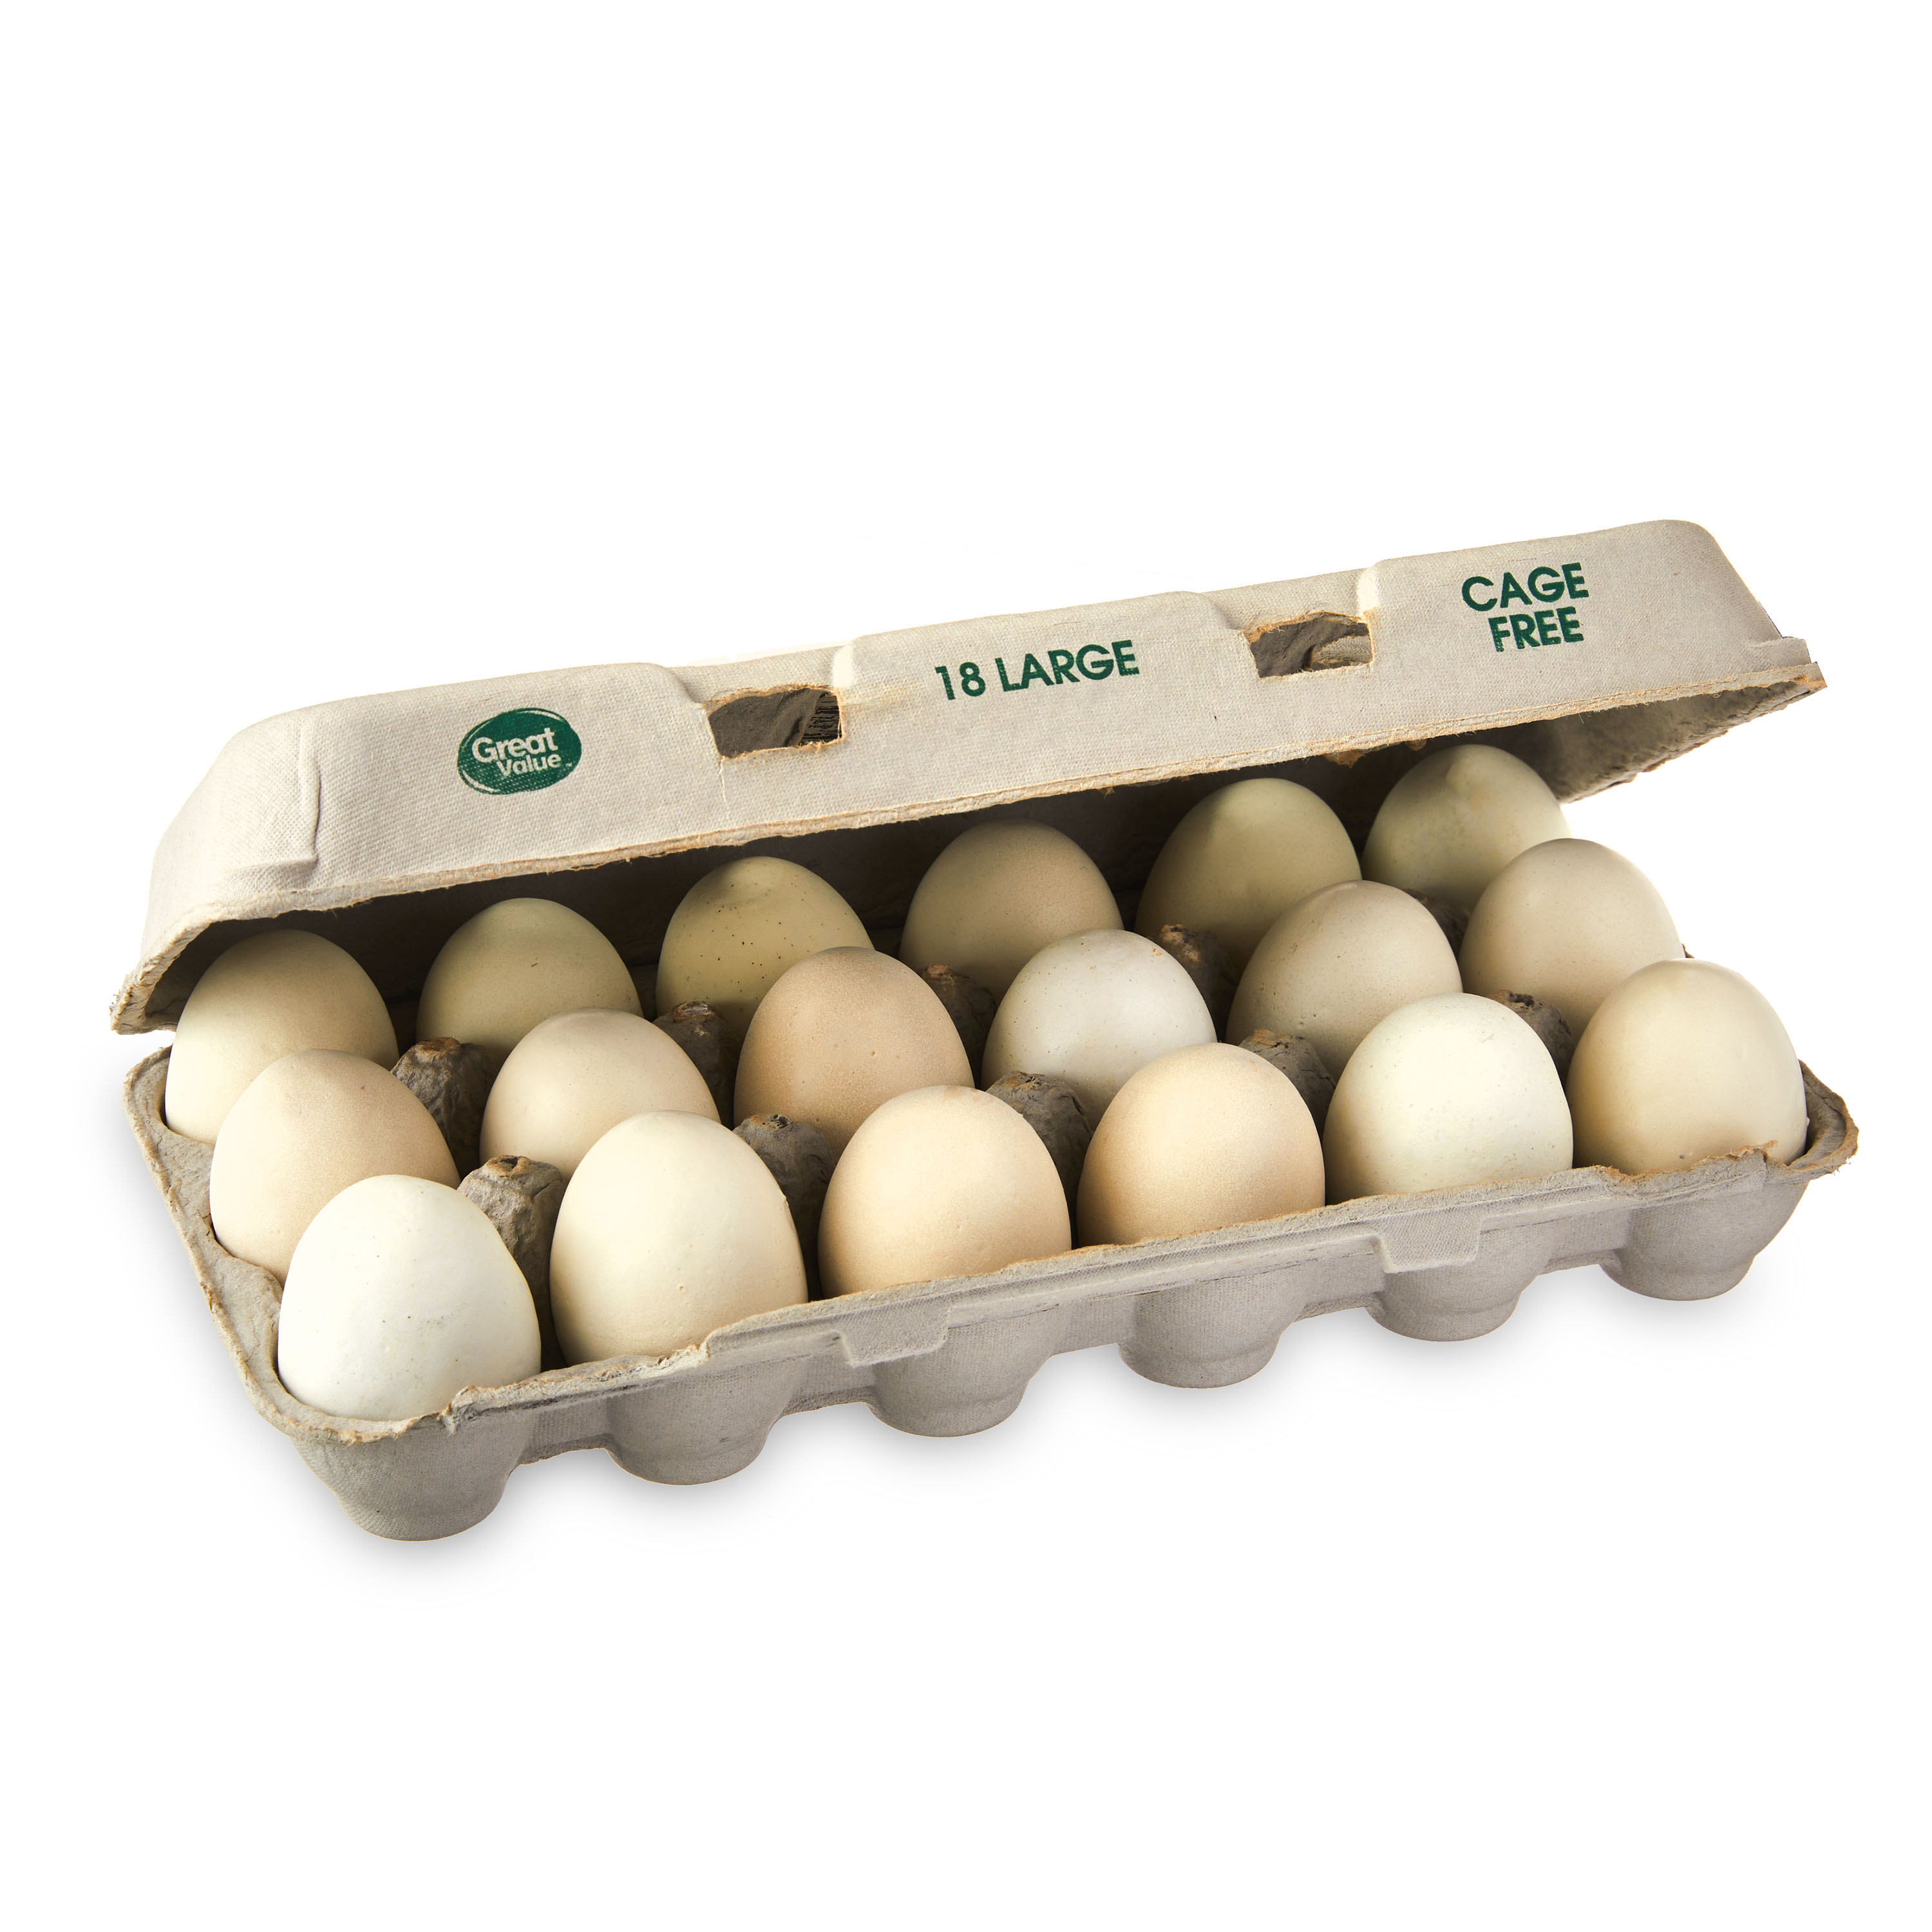 Great Value Cage-Free Large White Eggs, 18 Count - image 4 of 7